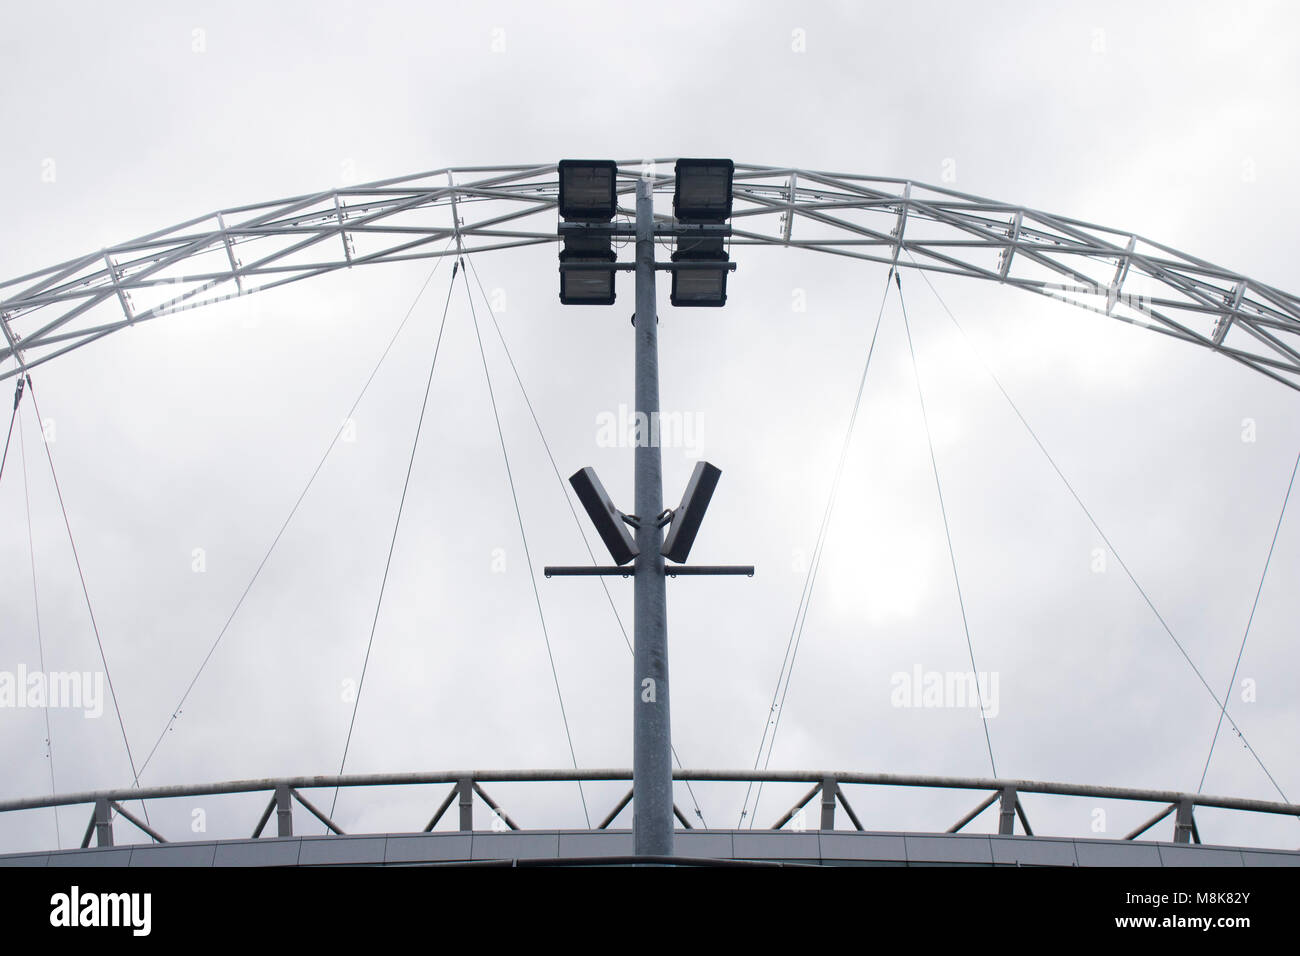 Wembley event Sport Stadion arch in London mit Beleuchtung Stockfoto